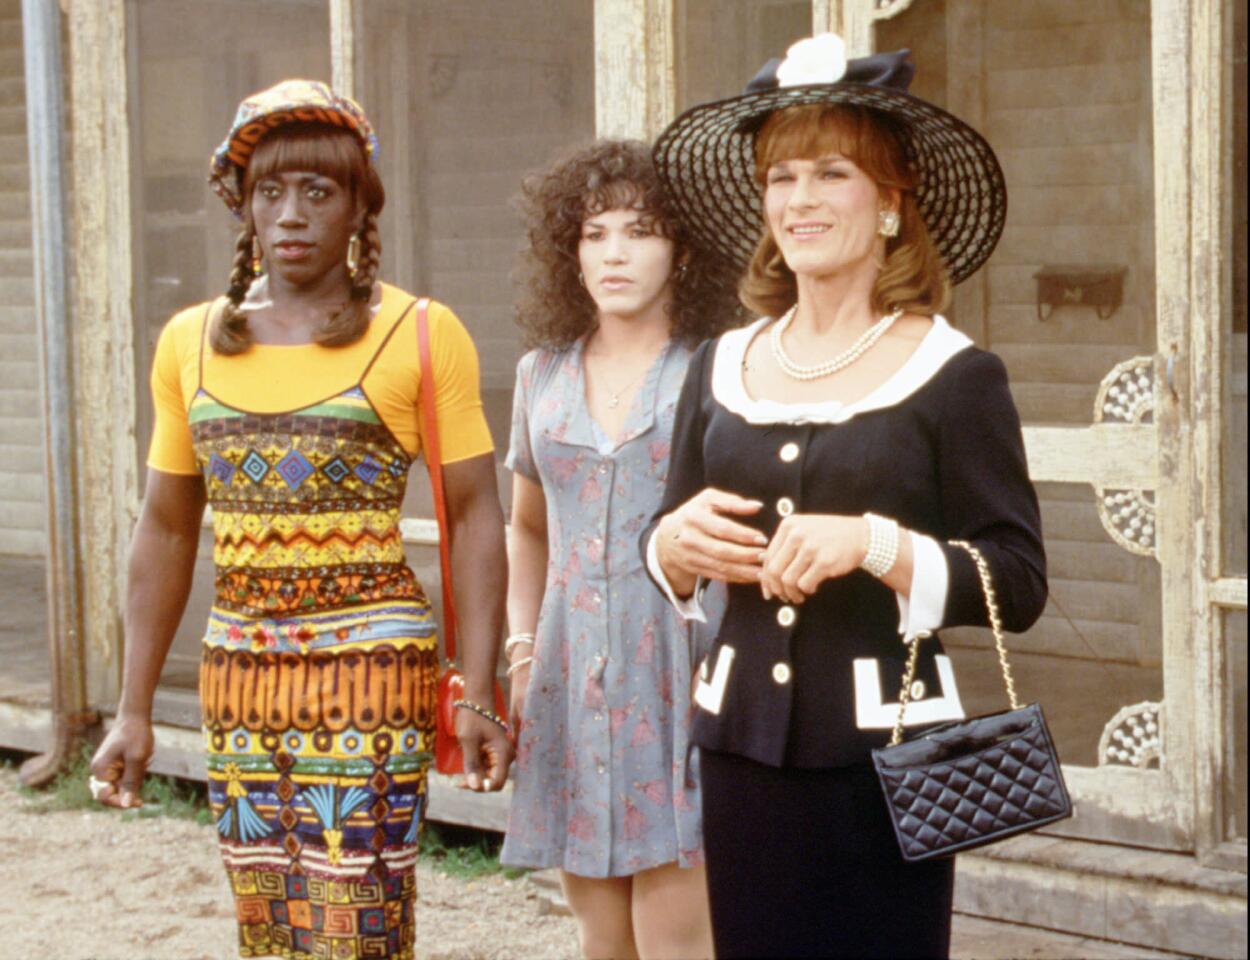 Wesley Snipes, John Leguizamo and Patrick Swayze, from left, in "To Wong Foo, Thanks For Everything, Julie Newmar."